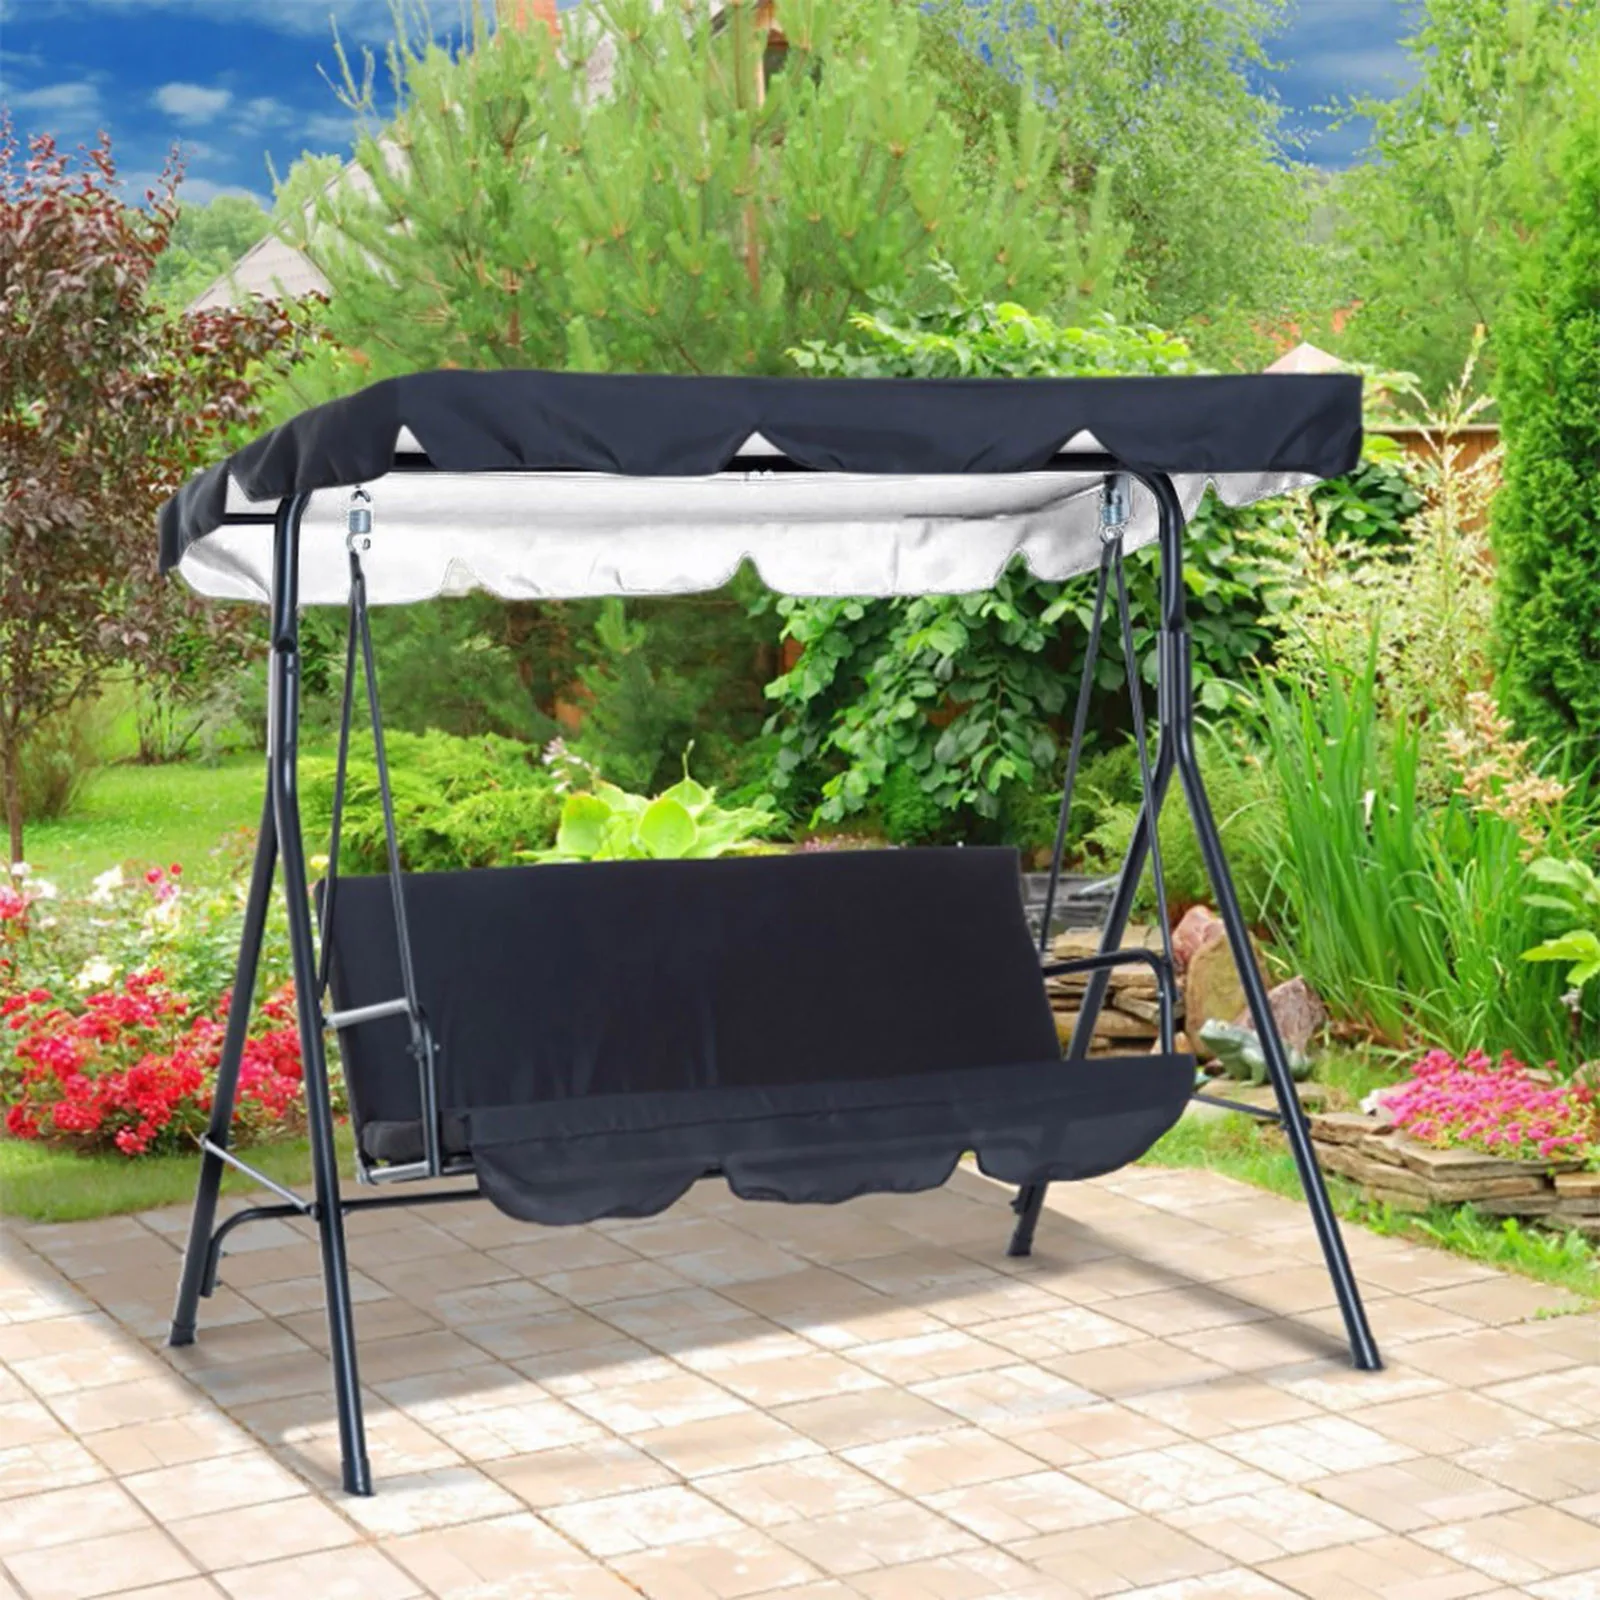 Swing Chair Cover Outdoor Garden Swing Pad Chair Seat Top Cover Sunshade Canopy Waterproof Replacement Chair Awning Cushion Seat